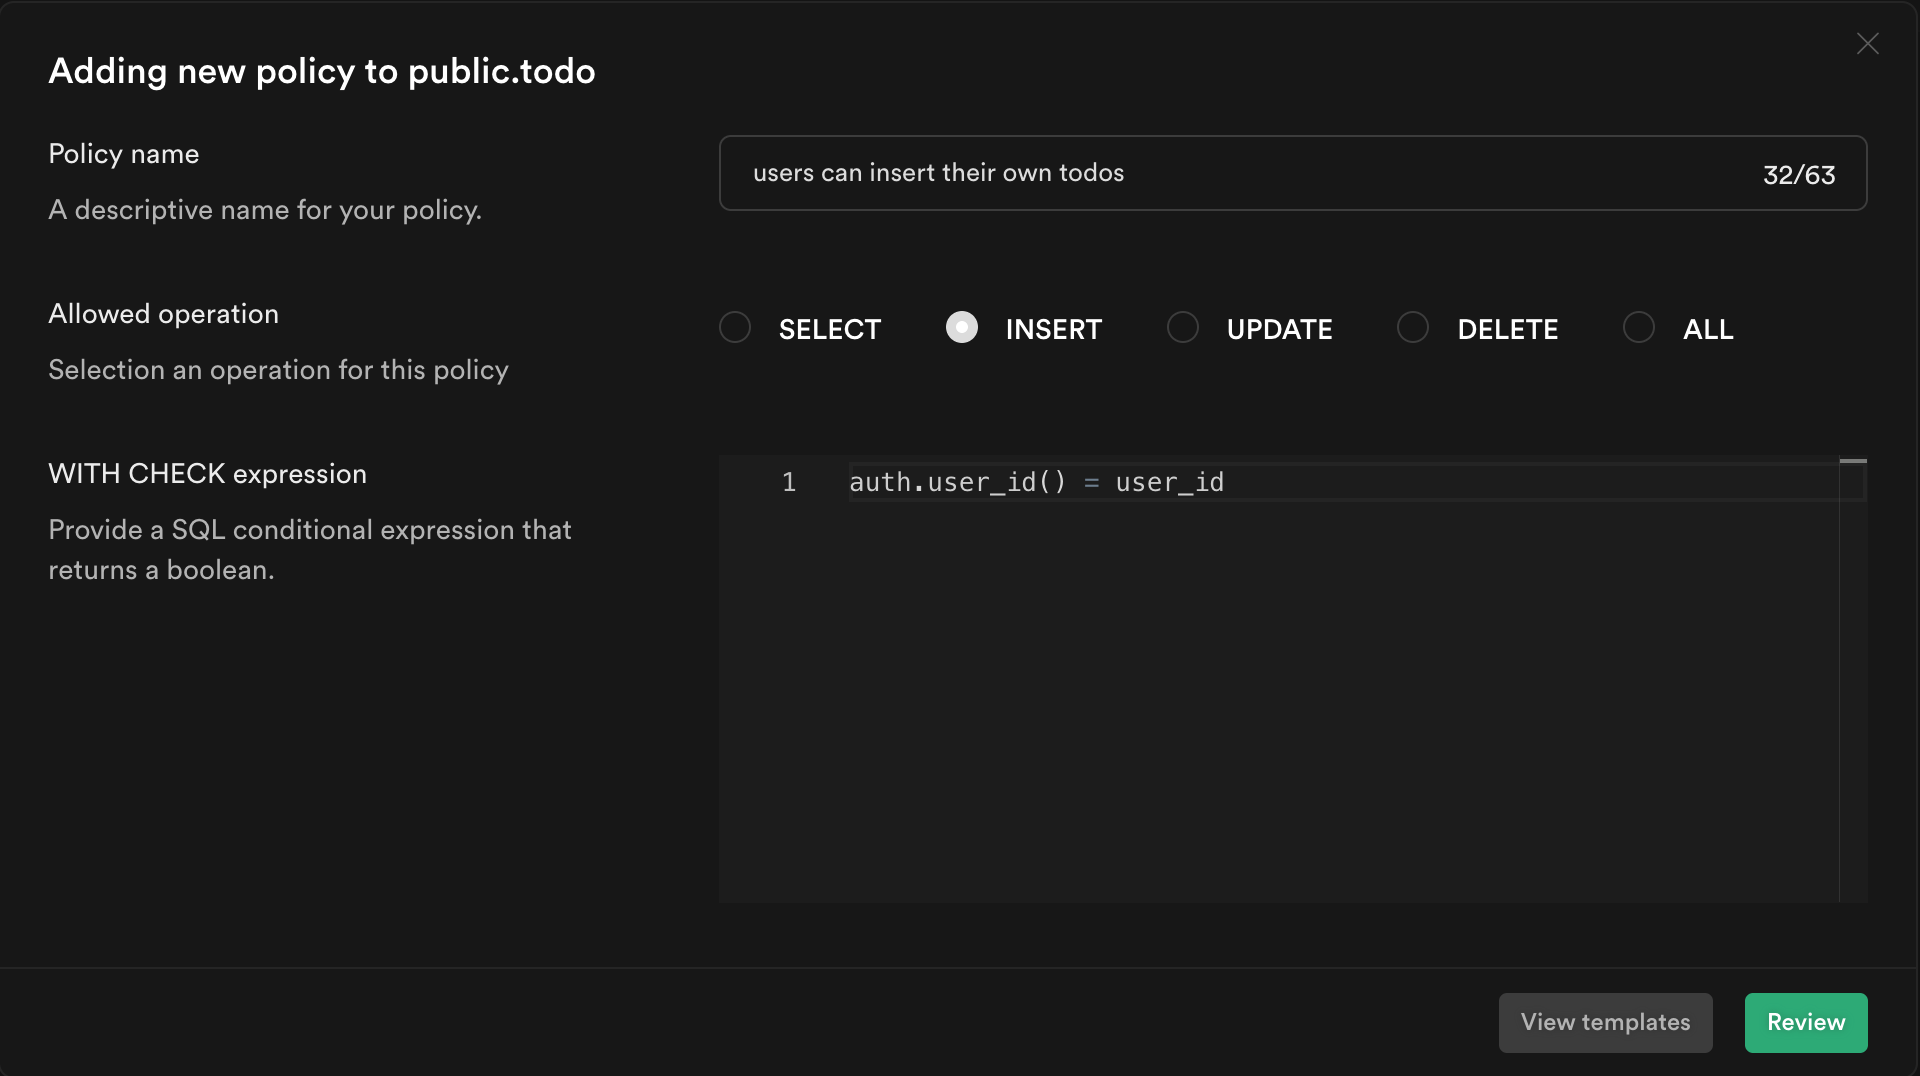 Policy settings for INSERT